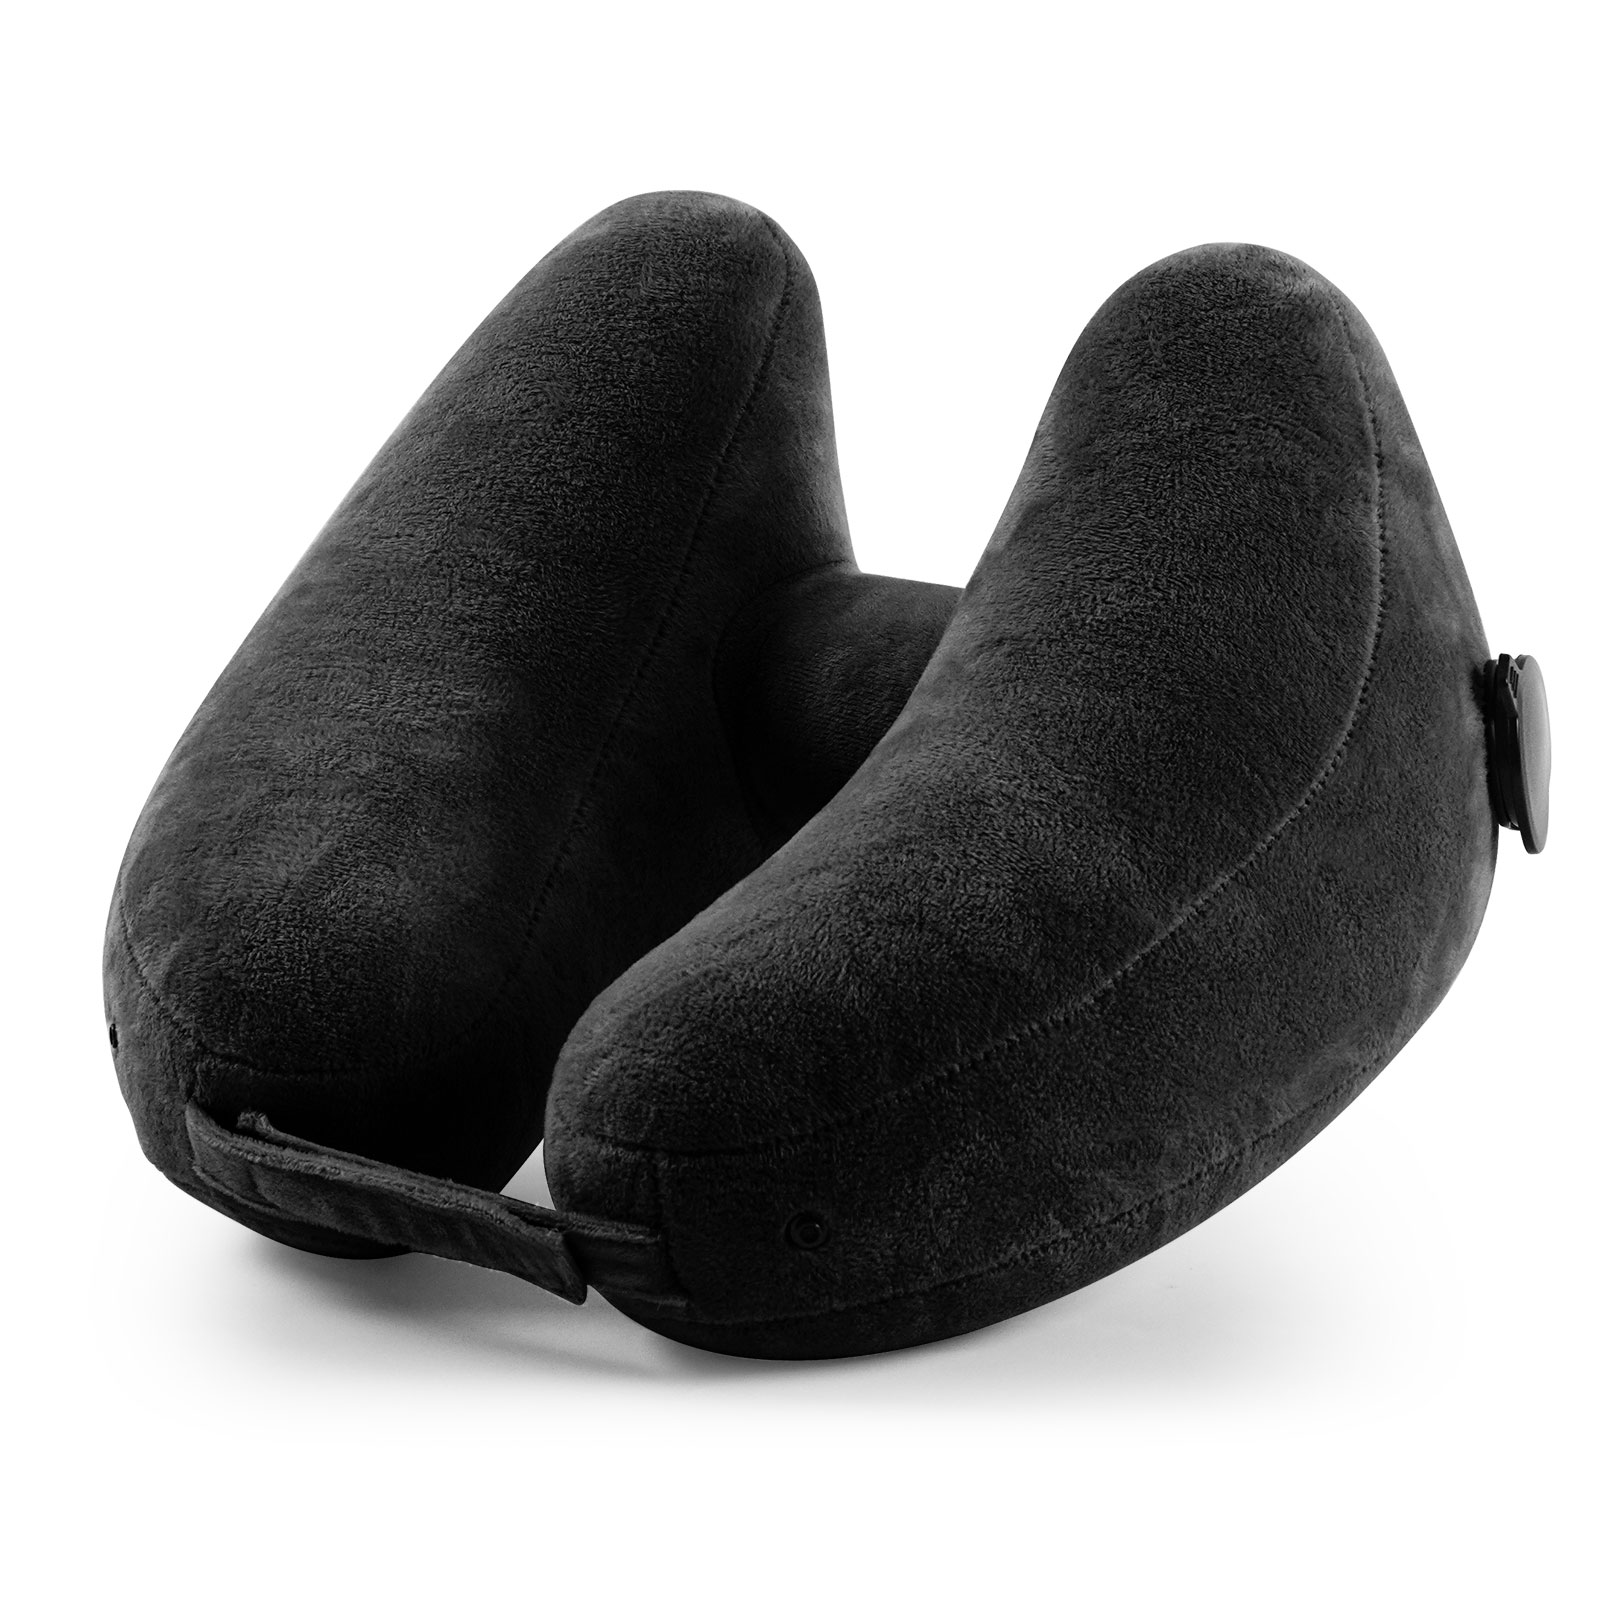 Inflatable Neck Pillow - Black